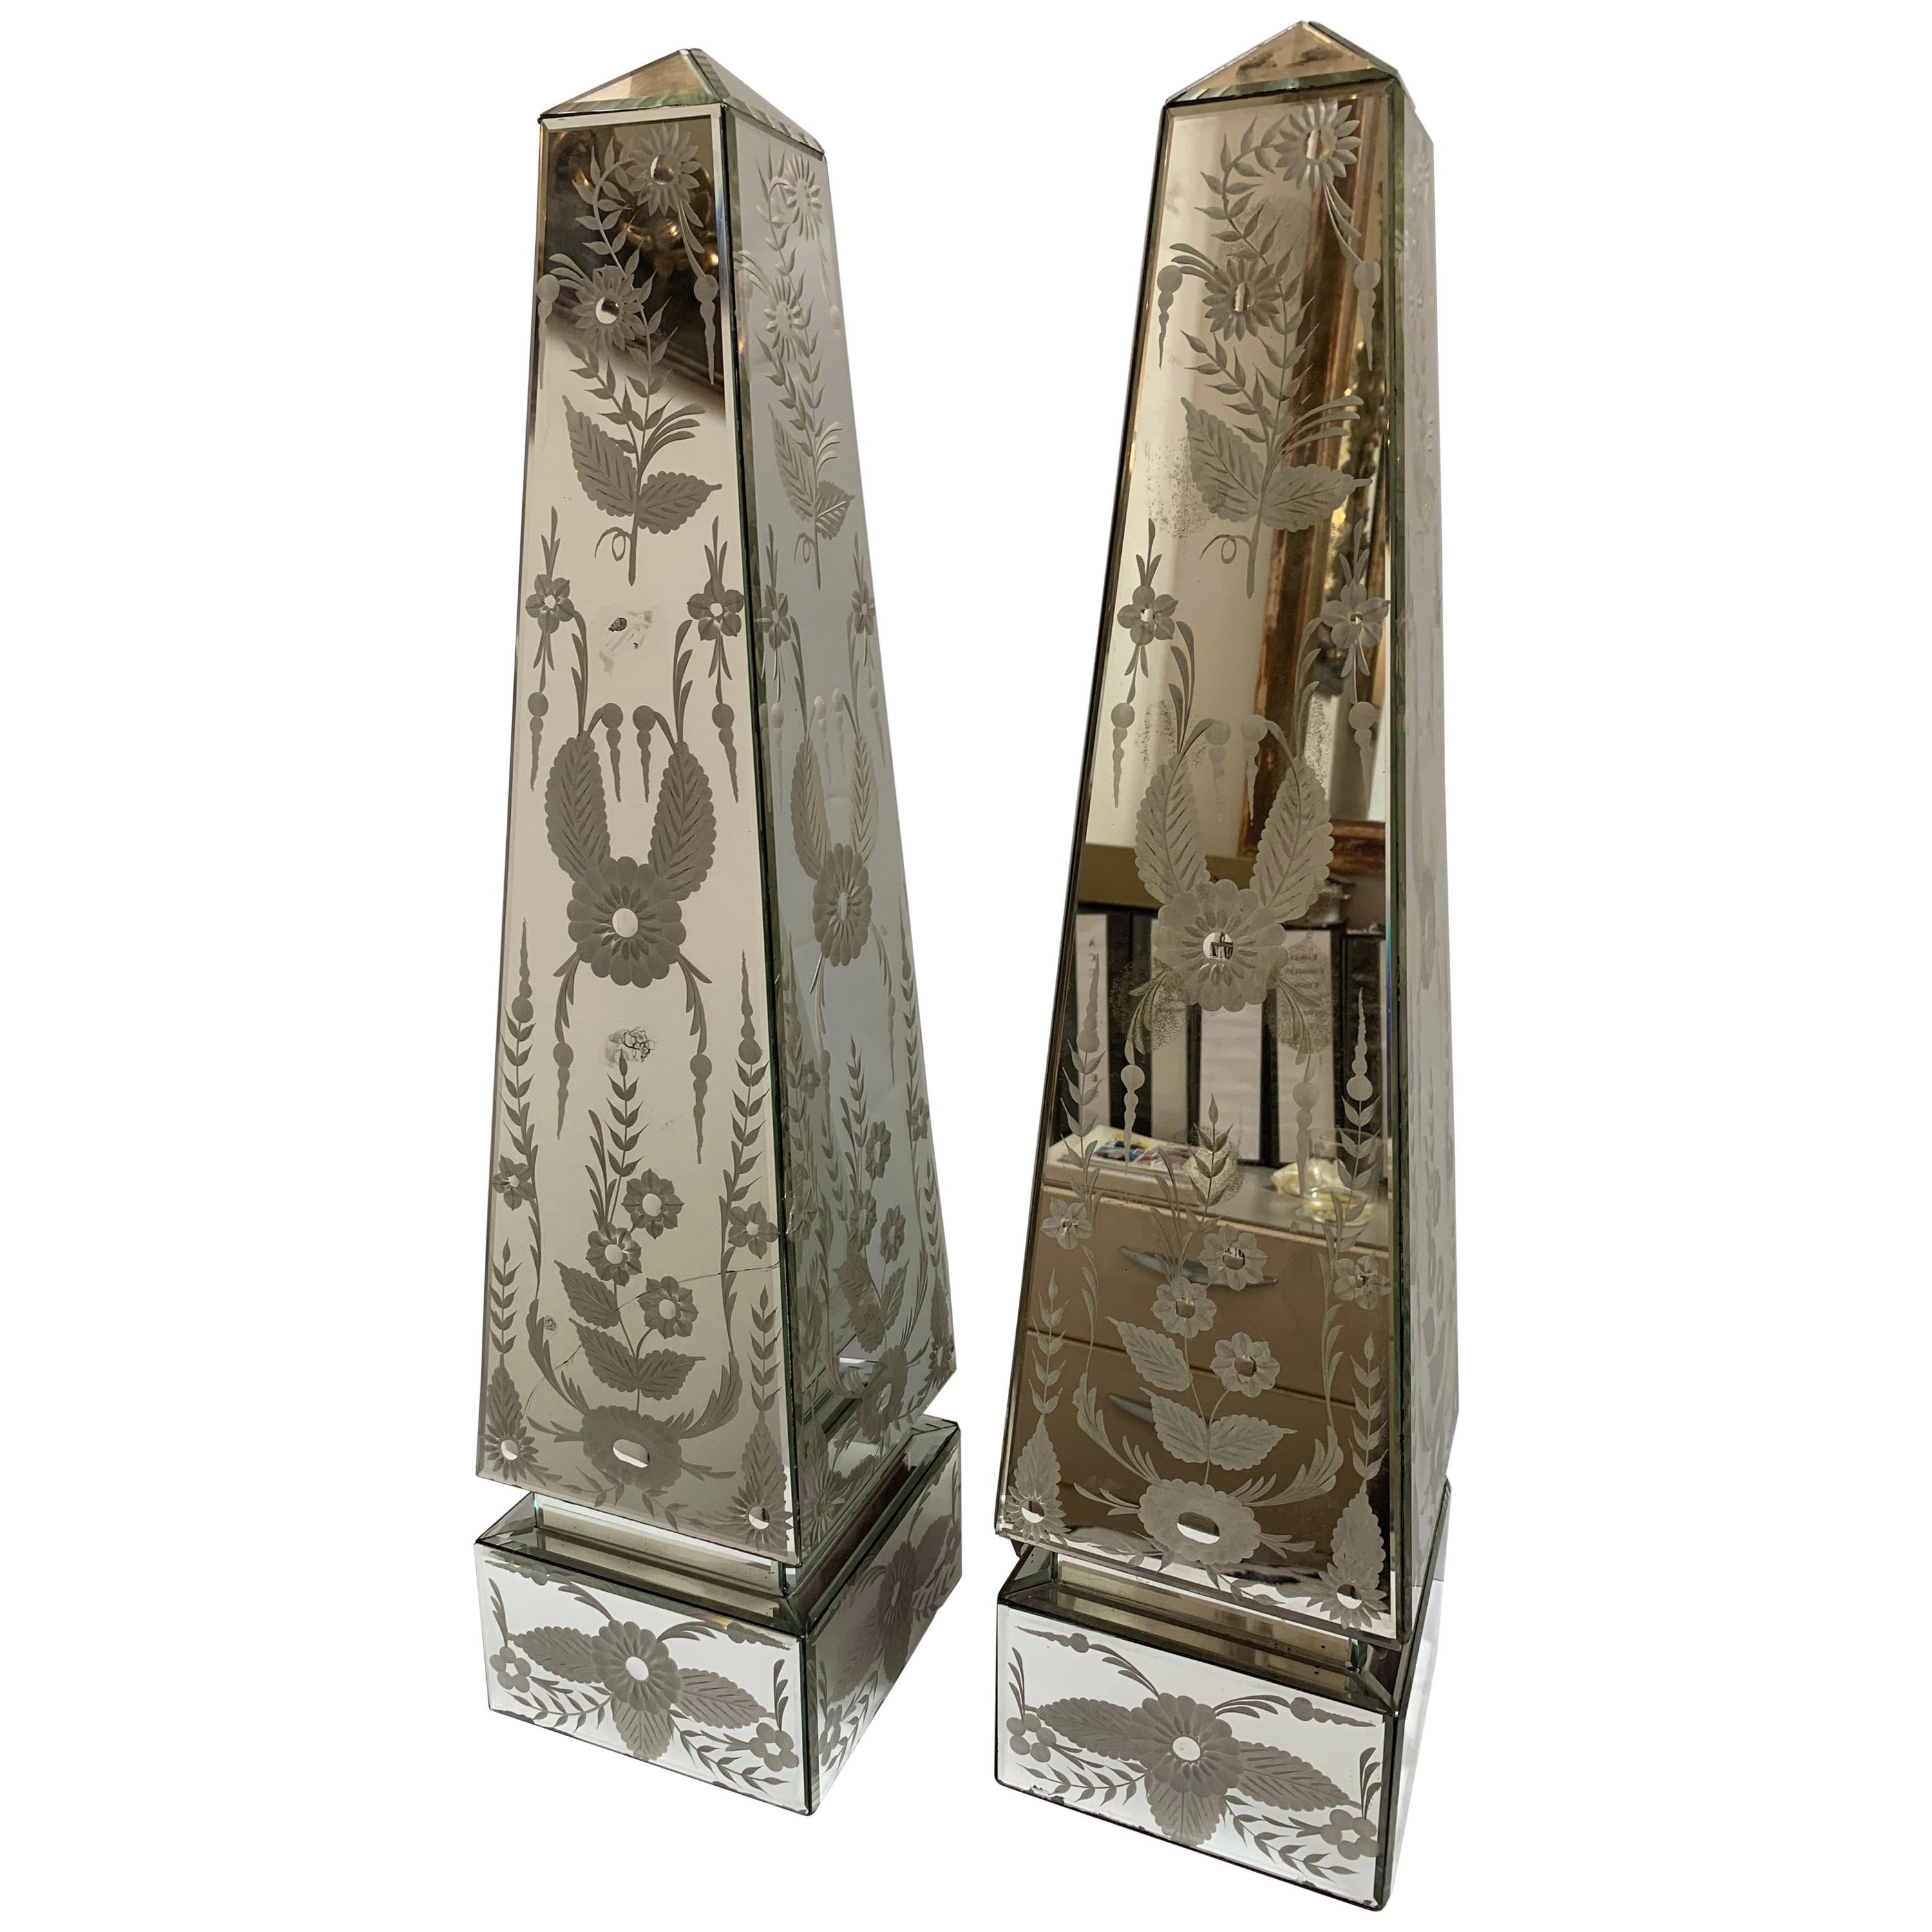 Exquisite Pair of Etched Mirrored Obelisk